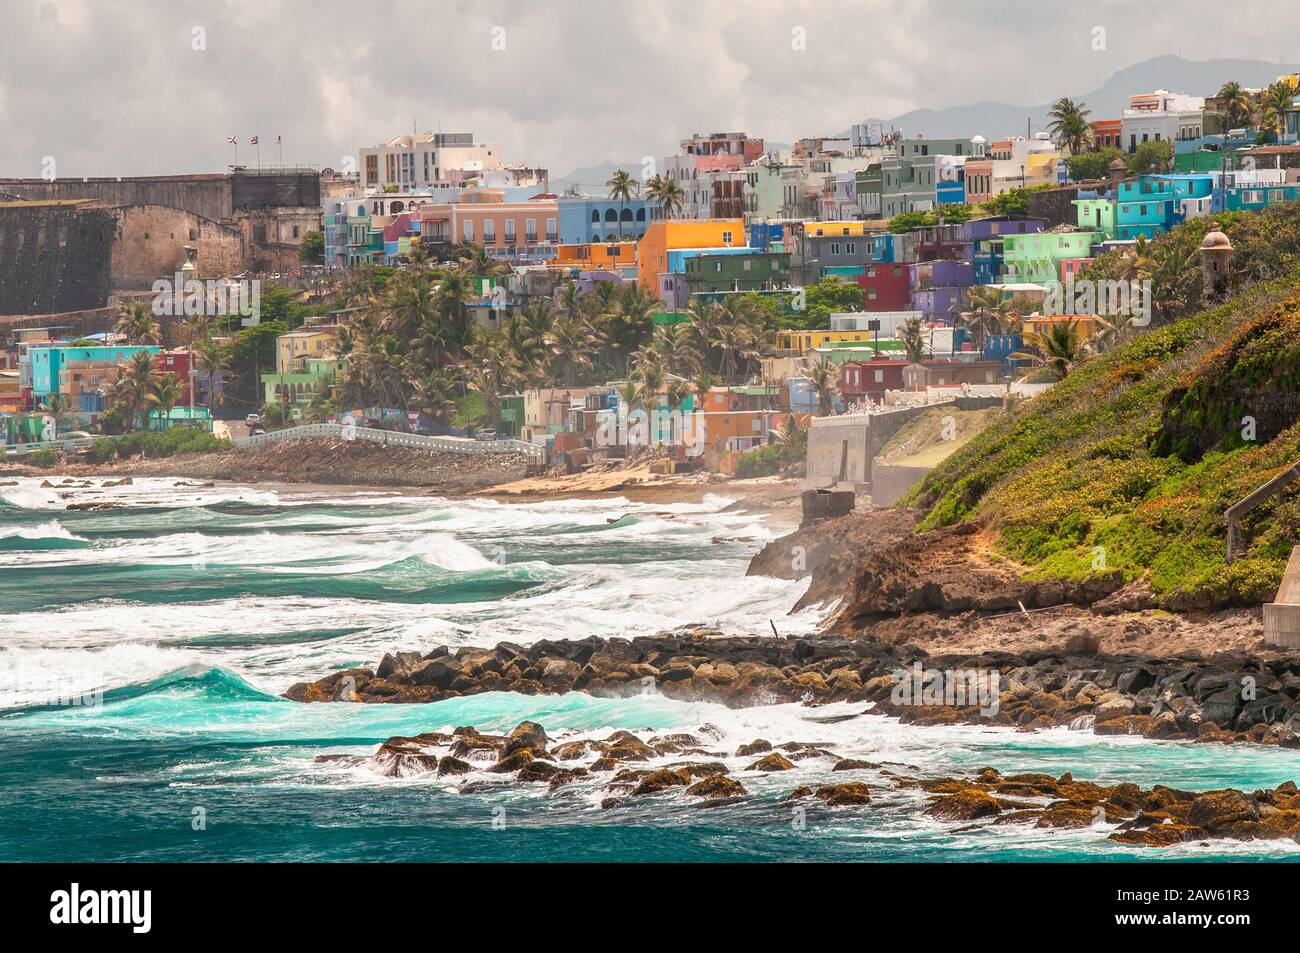 Colorful houses line the hillside over looking the beach in San Juan, Puerto Rico. Stock Photo